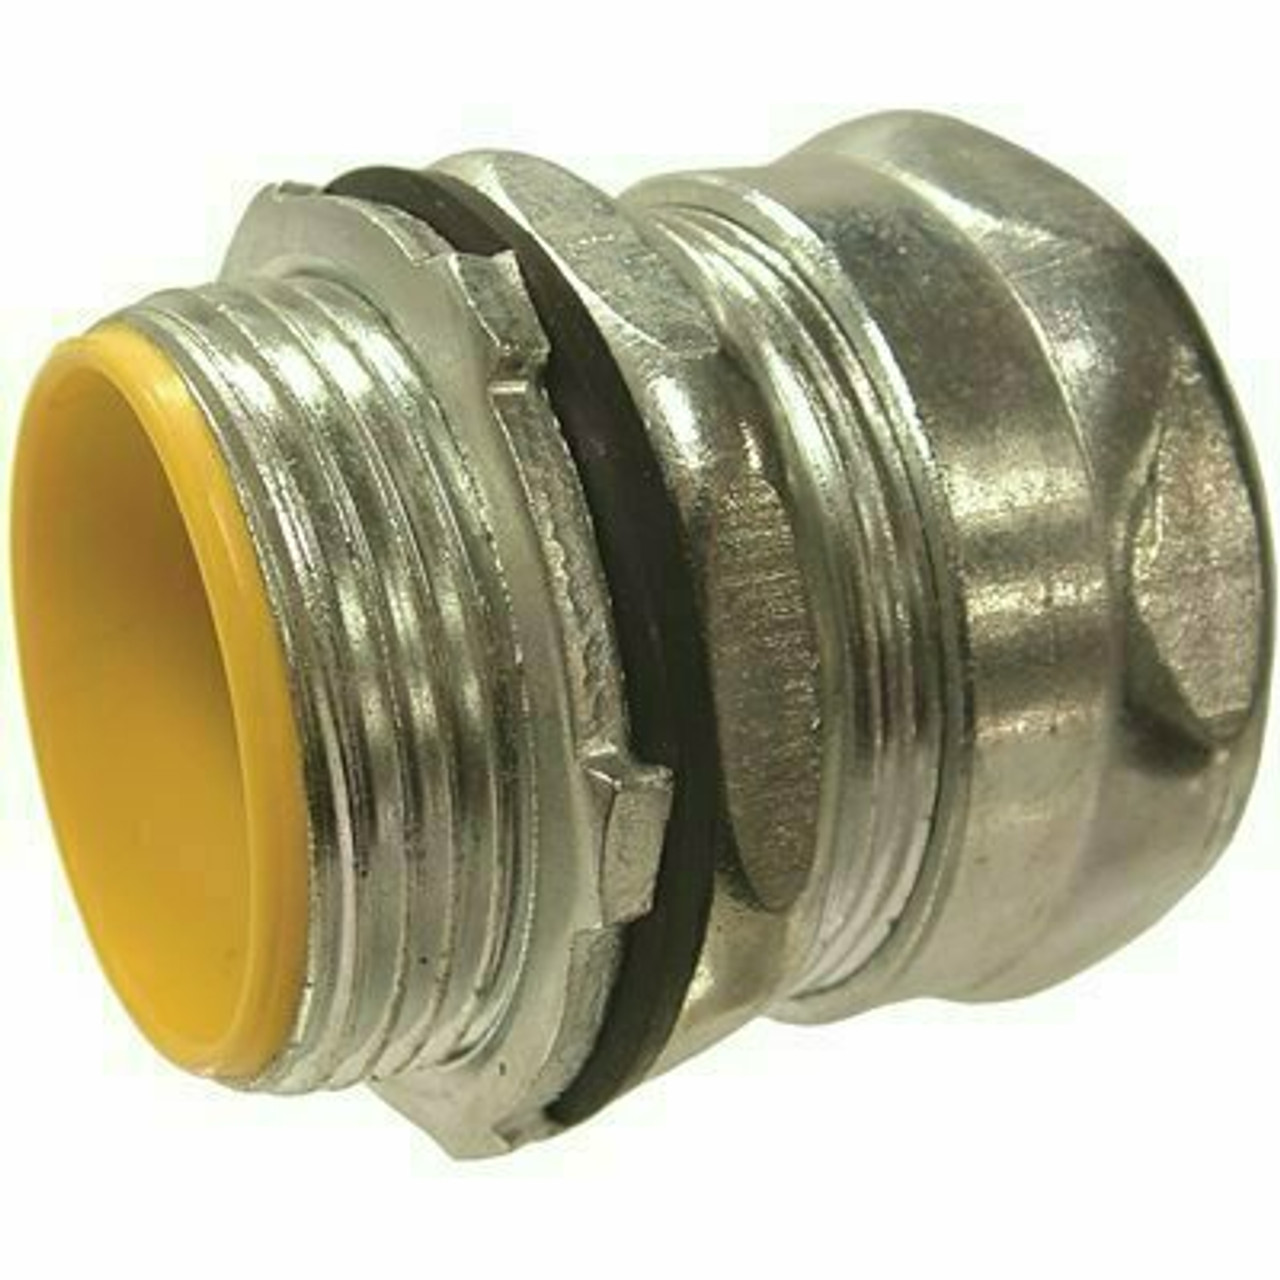 Hubbell Commercial Construction 1/2 In. Emt Raintight Compression Connector, Uninsulated